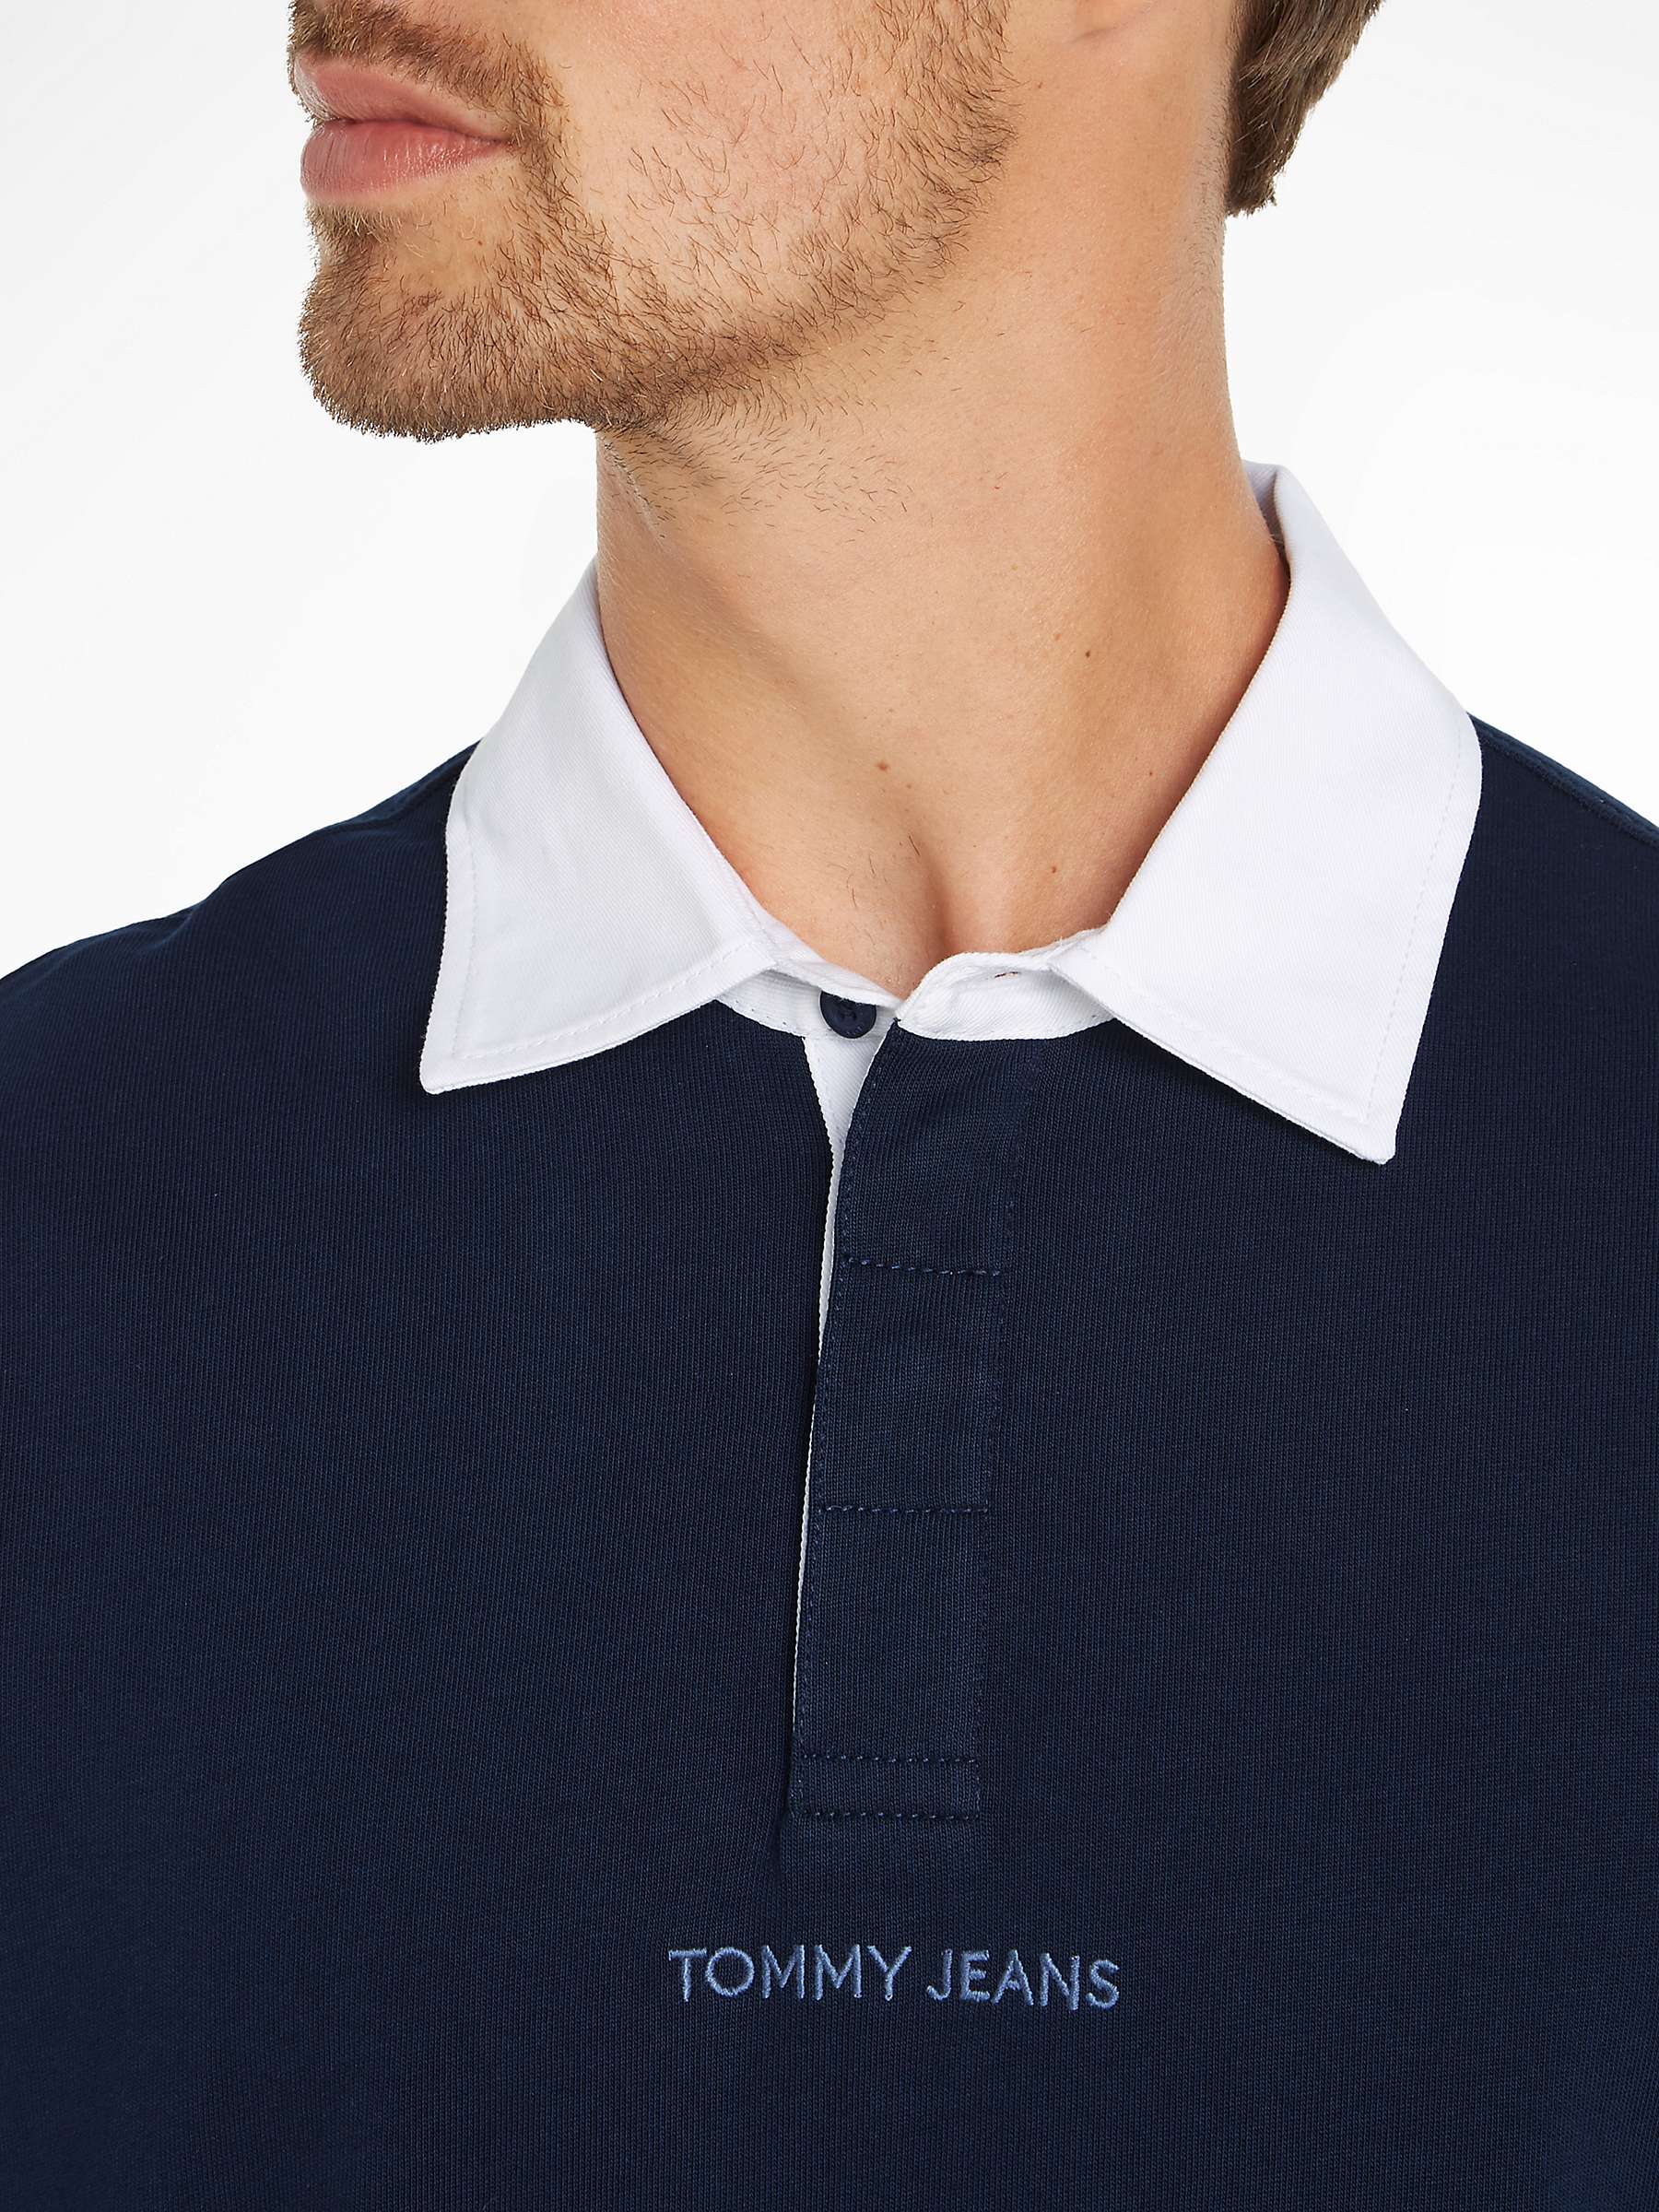 Buy Tommy Jeans Oversized Classic Rugby Top, Navy Online at johnlewis.com